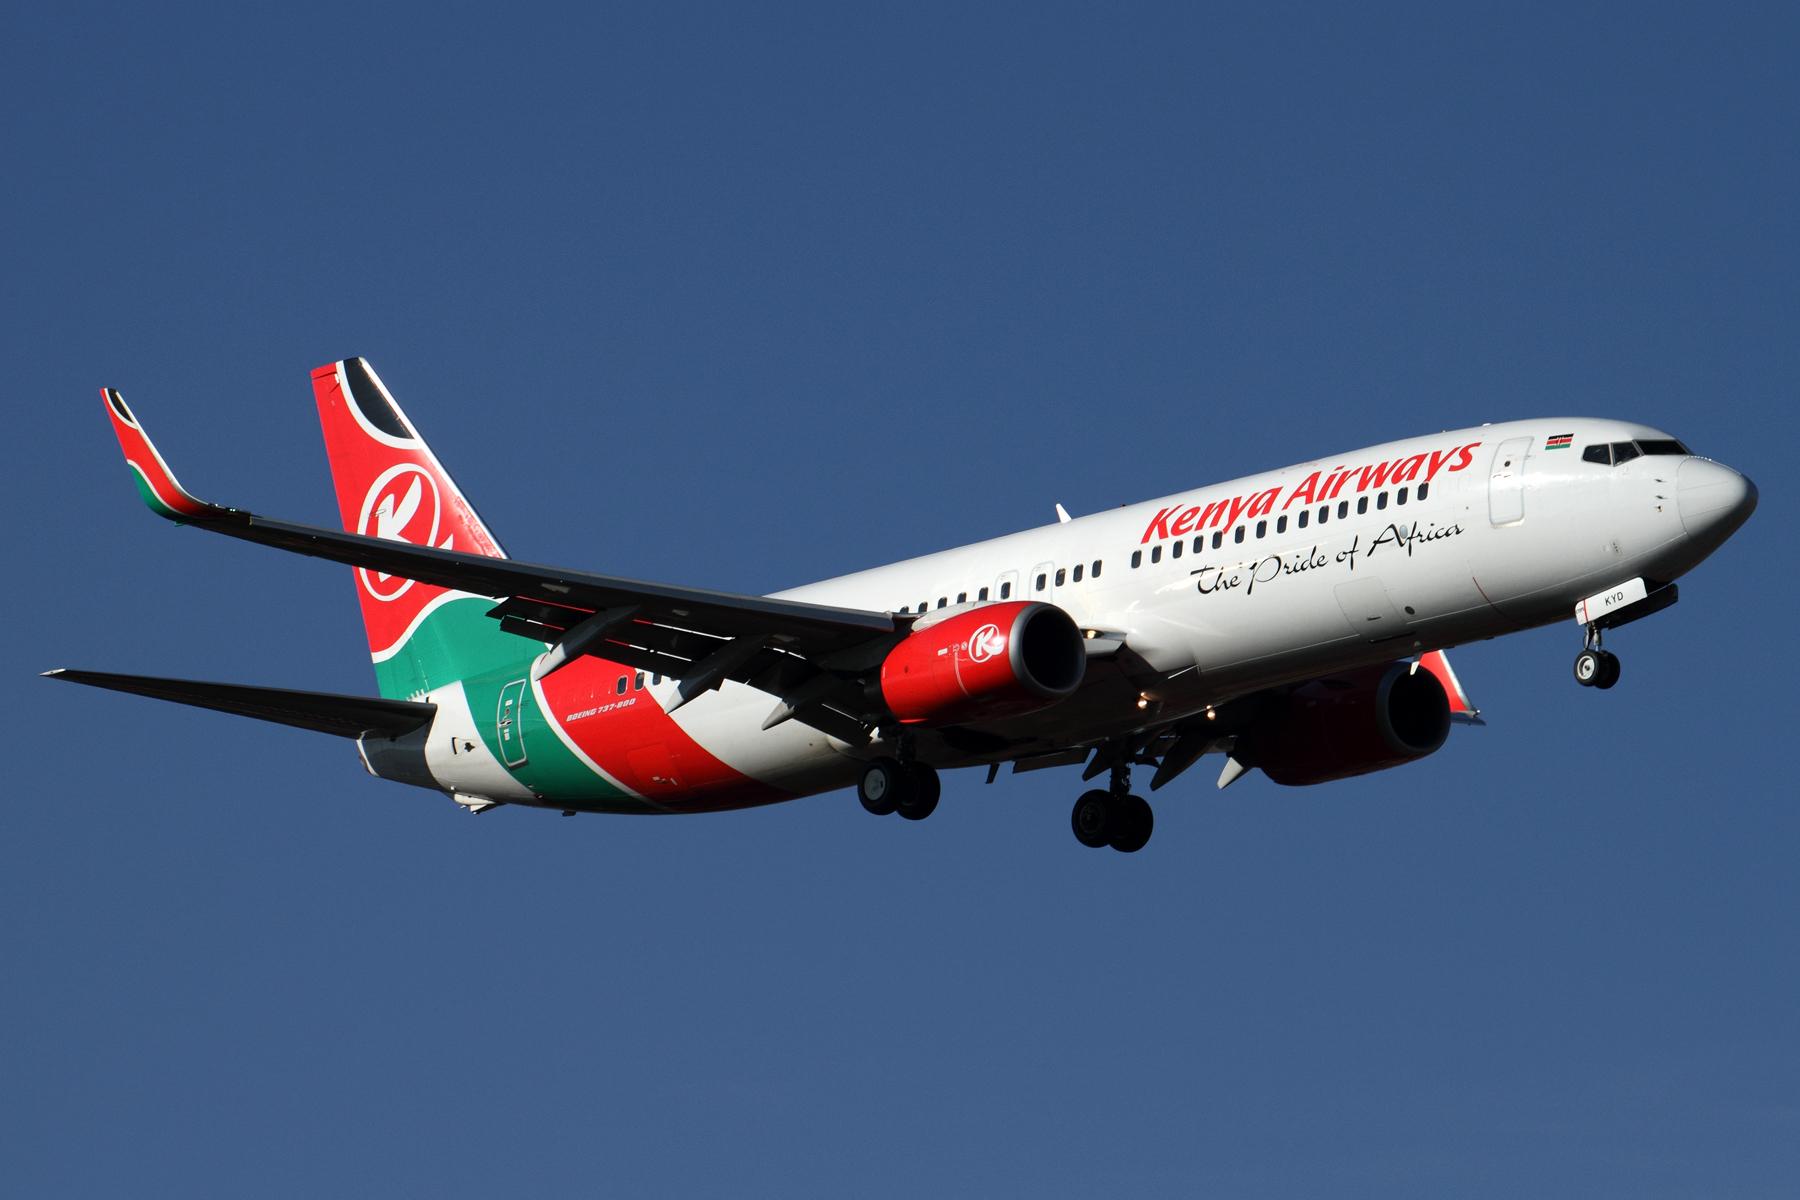 Kenya Airways Details Stages For South African Airways Partnership - Travel News, Insights & Resources.